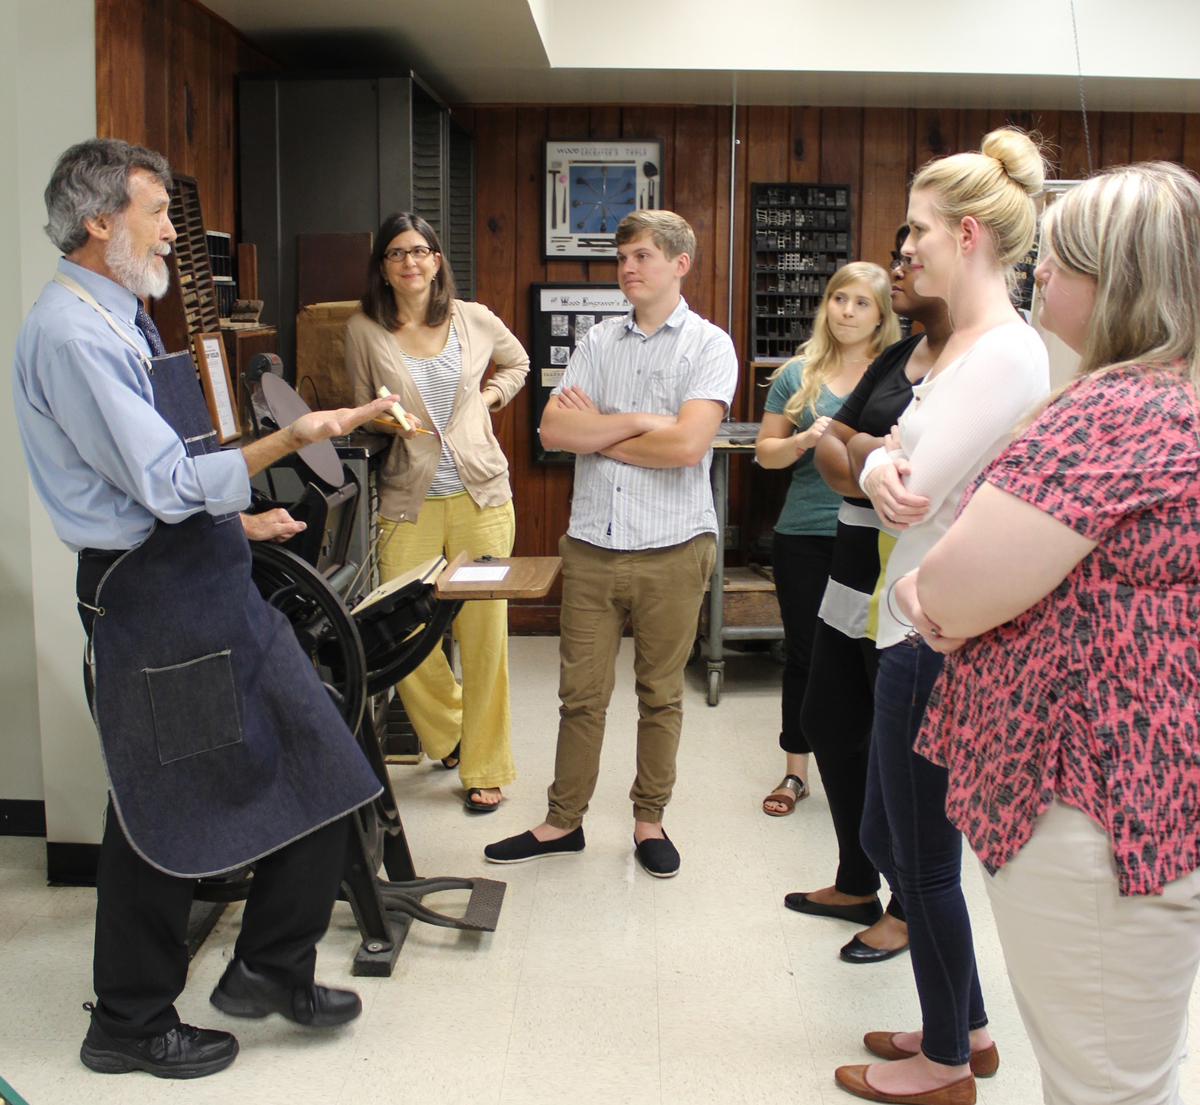 A man wearing an apron gestures as he speaks to a small group of students standing in a circle.